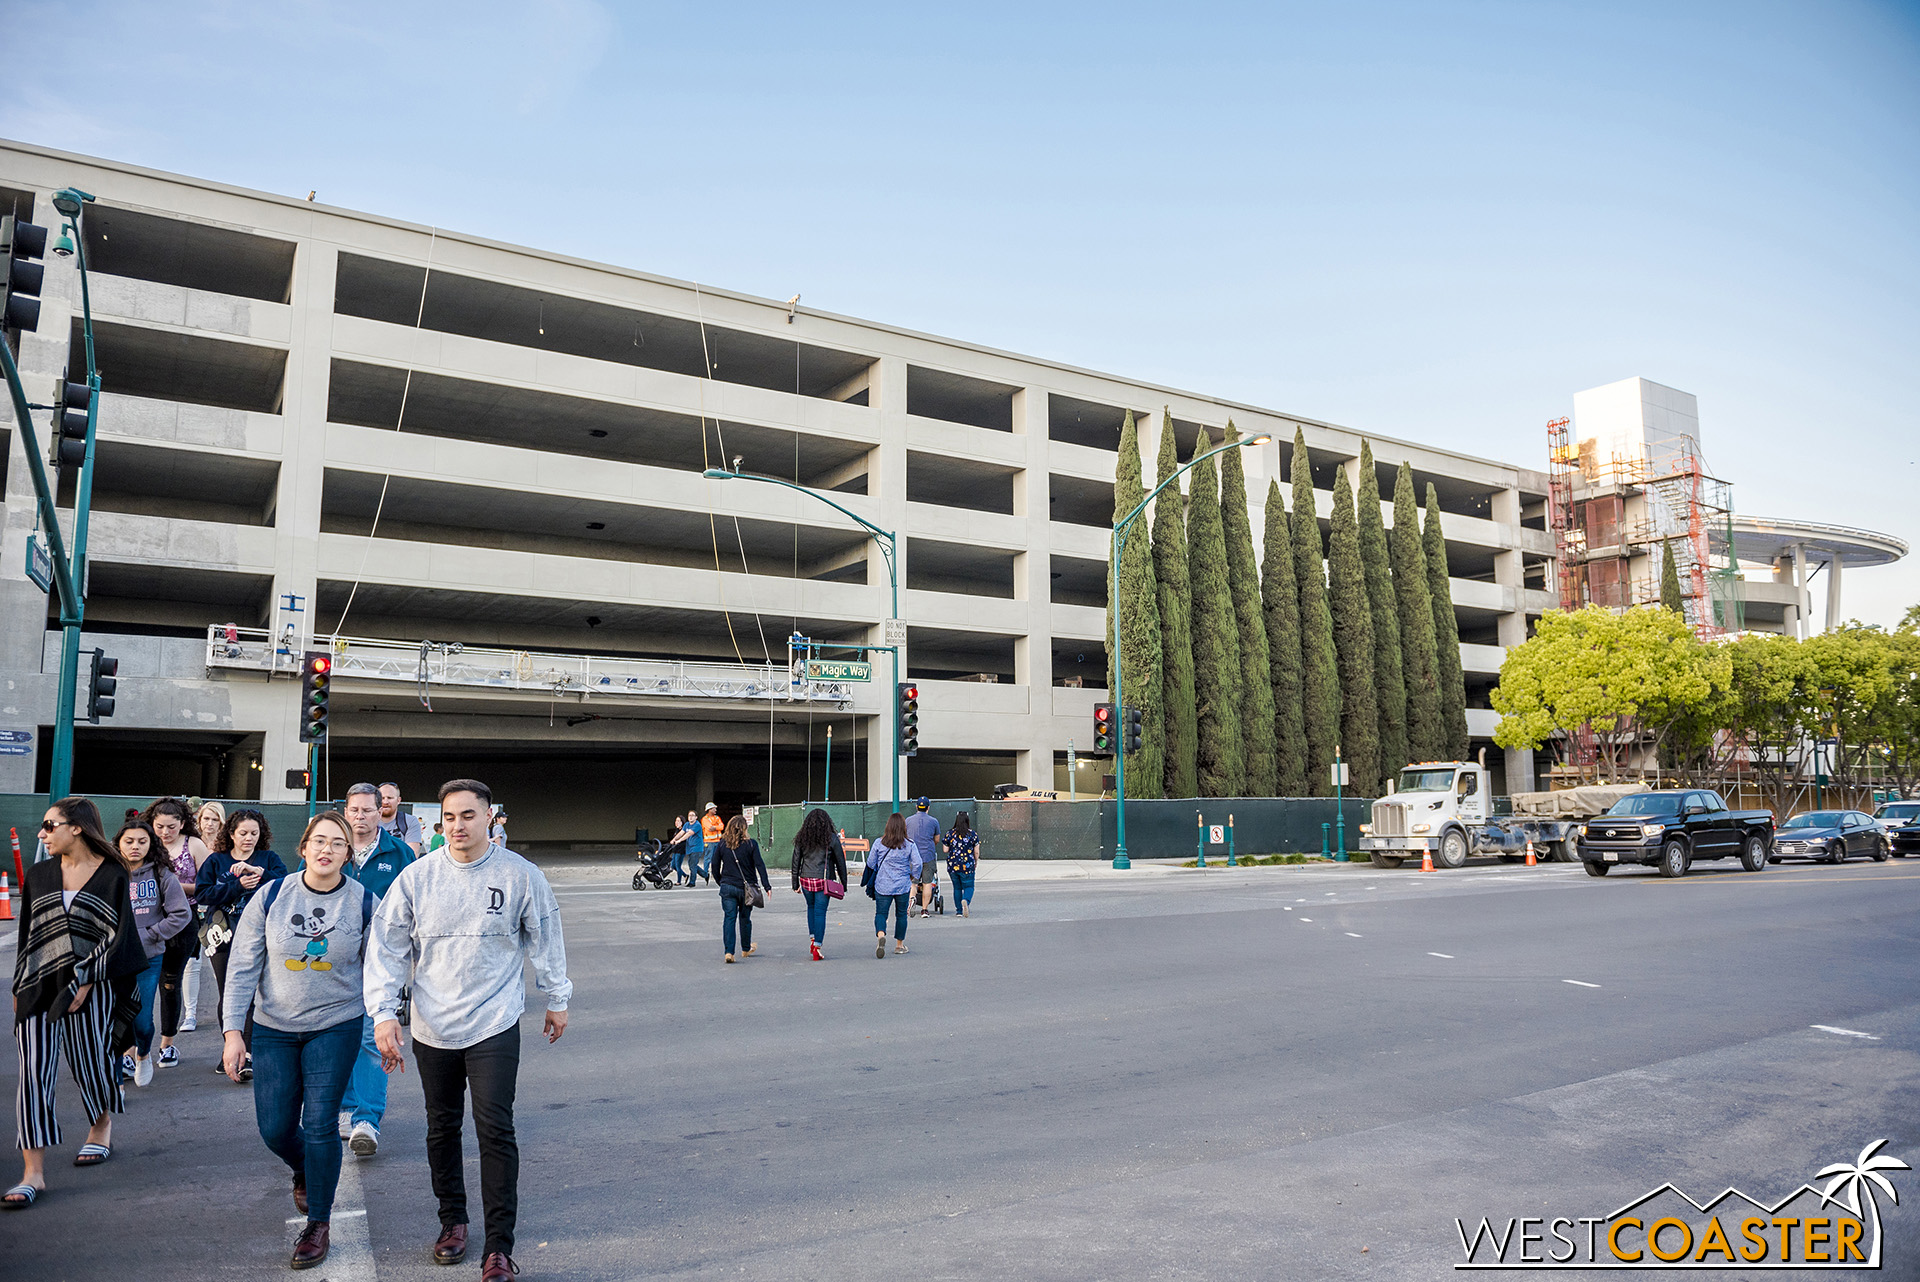  But a parking structure is better than none, so can’t wait to see this open! 